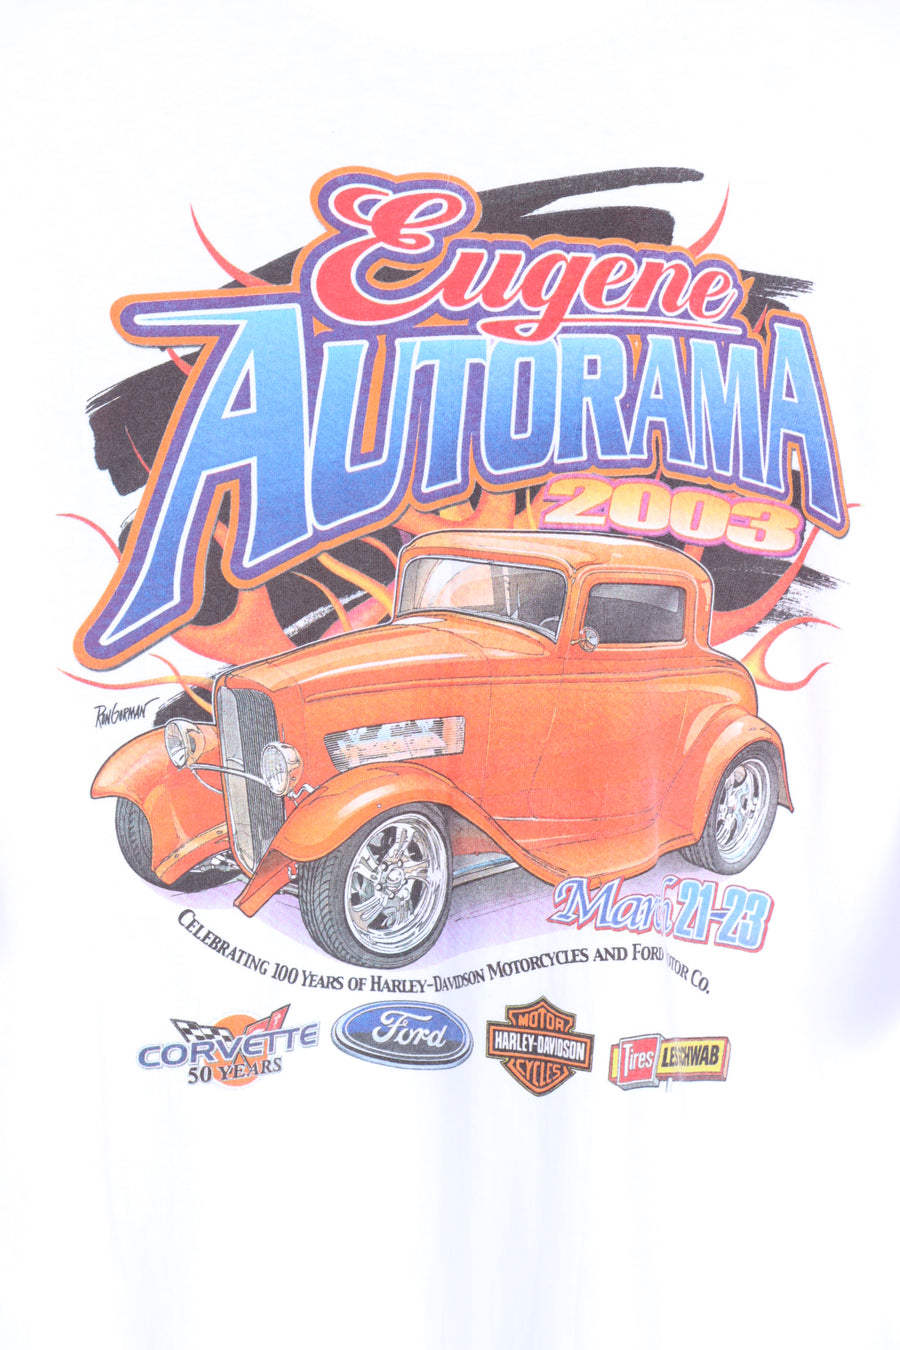 Autorama 100 Years of Harley Davidson & Ford Cars Print Tee (XL) - Vintage Sole Melbourne